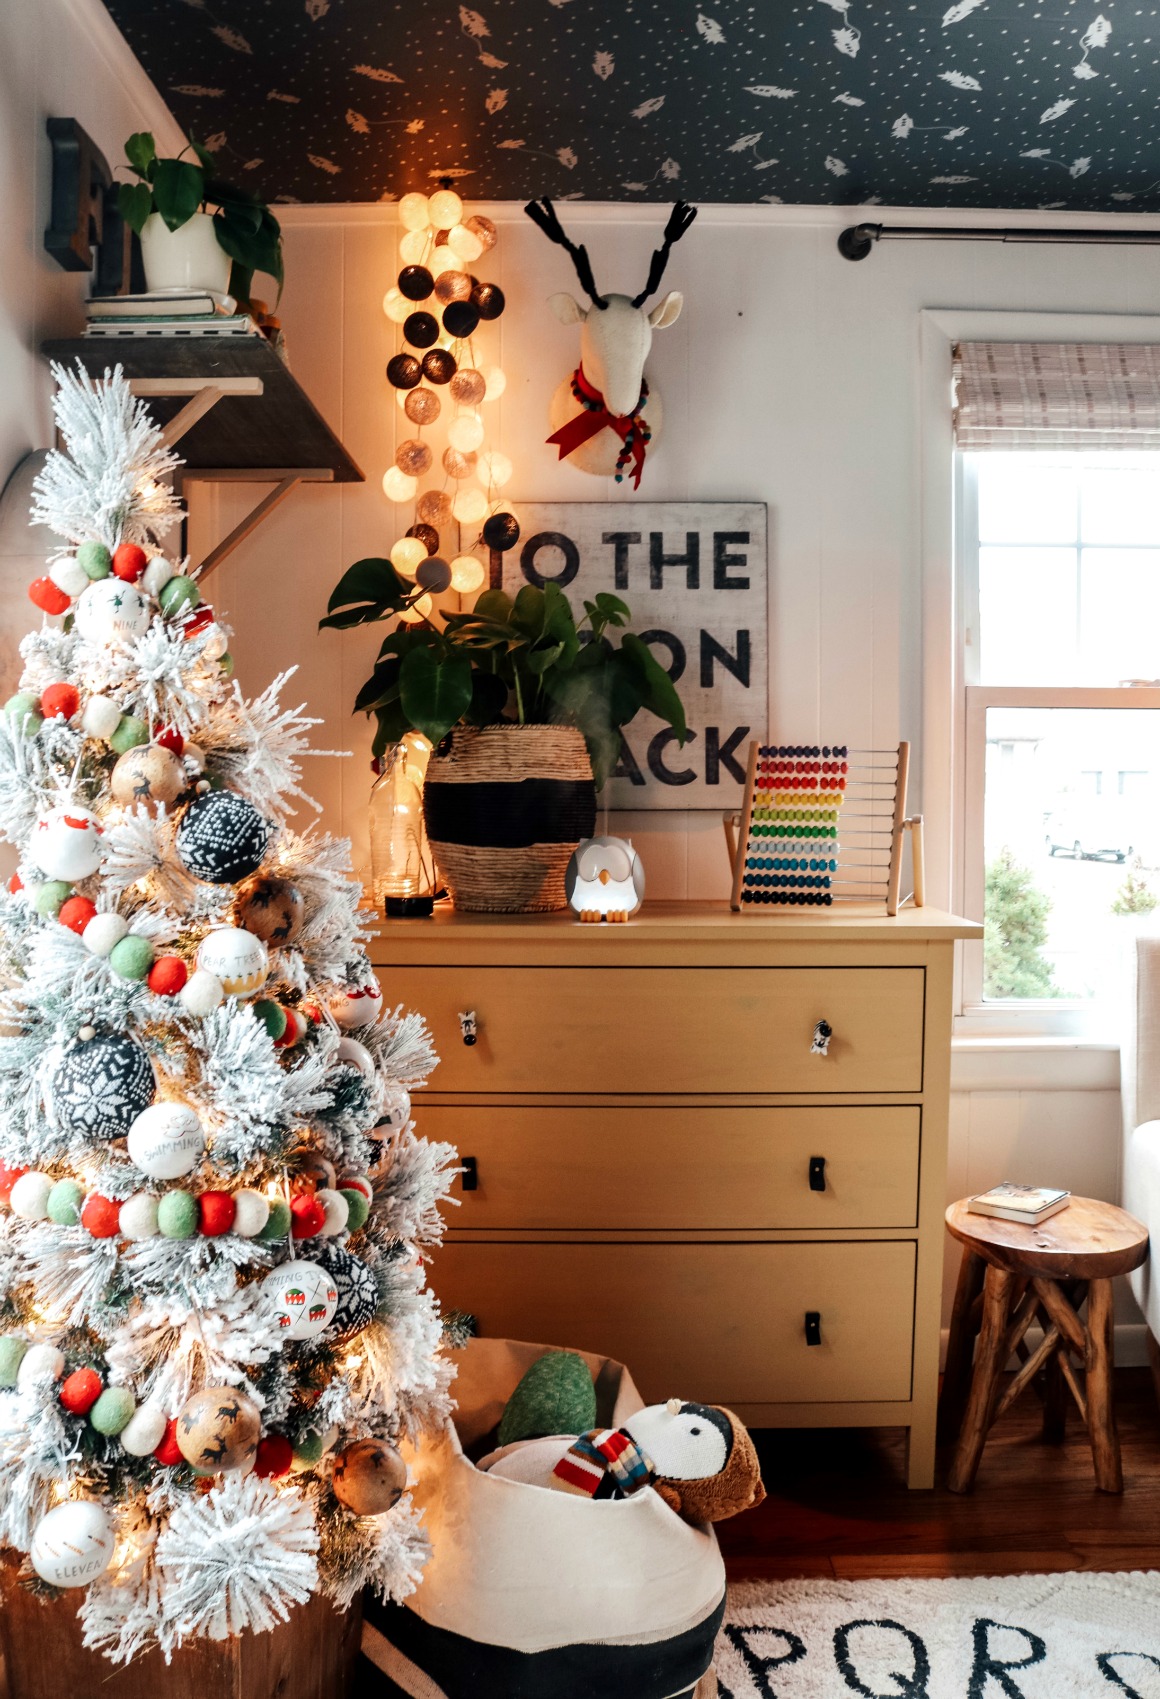 Christmas Home Decor in a Small Space